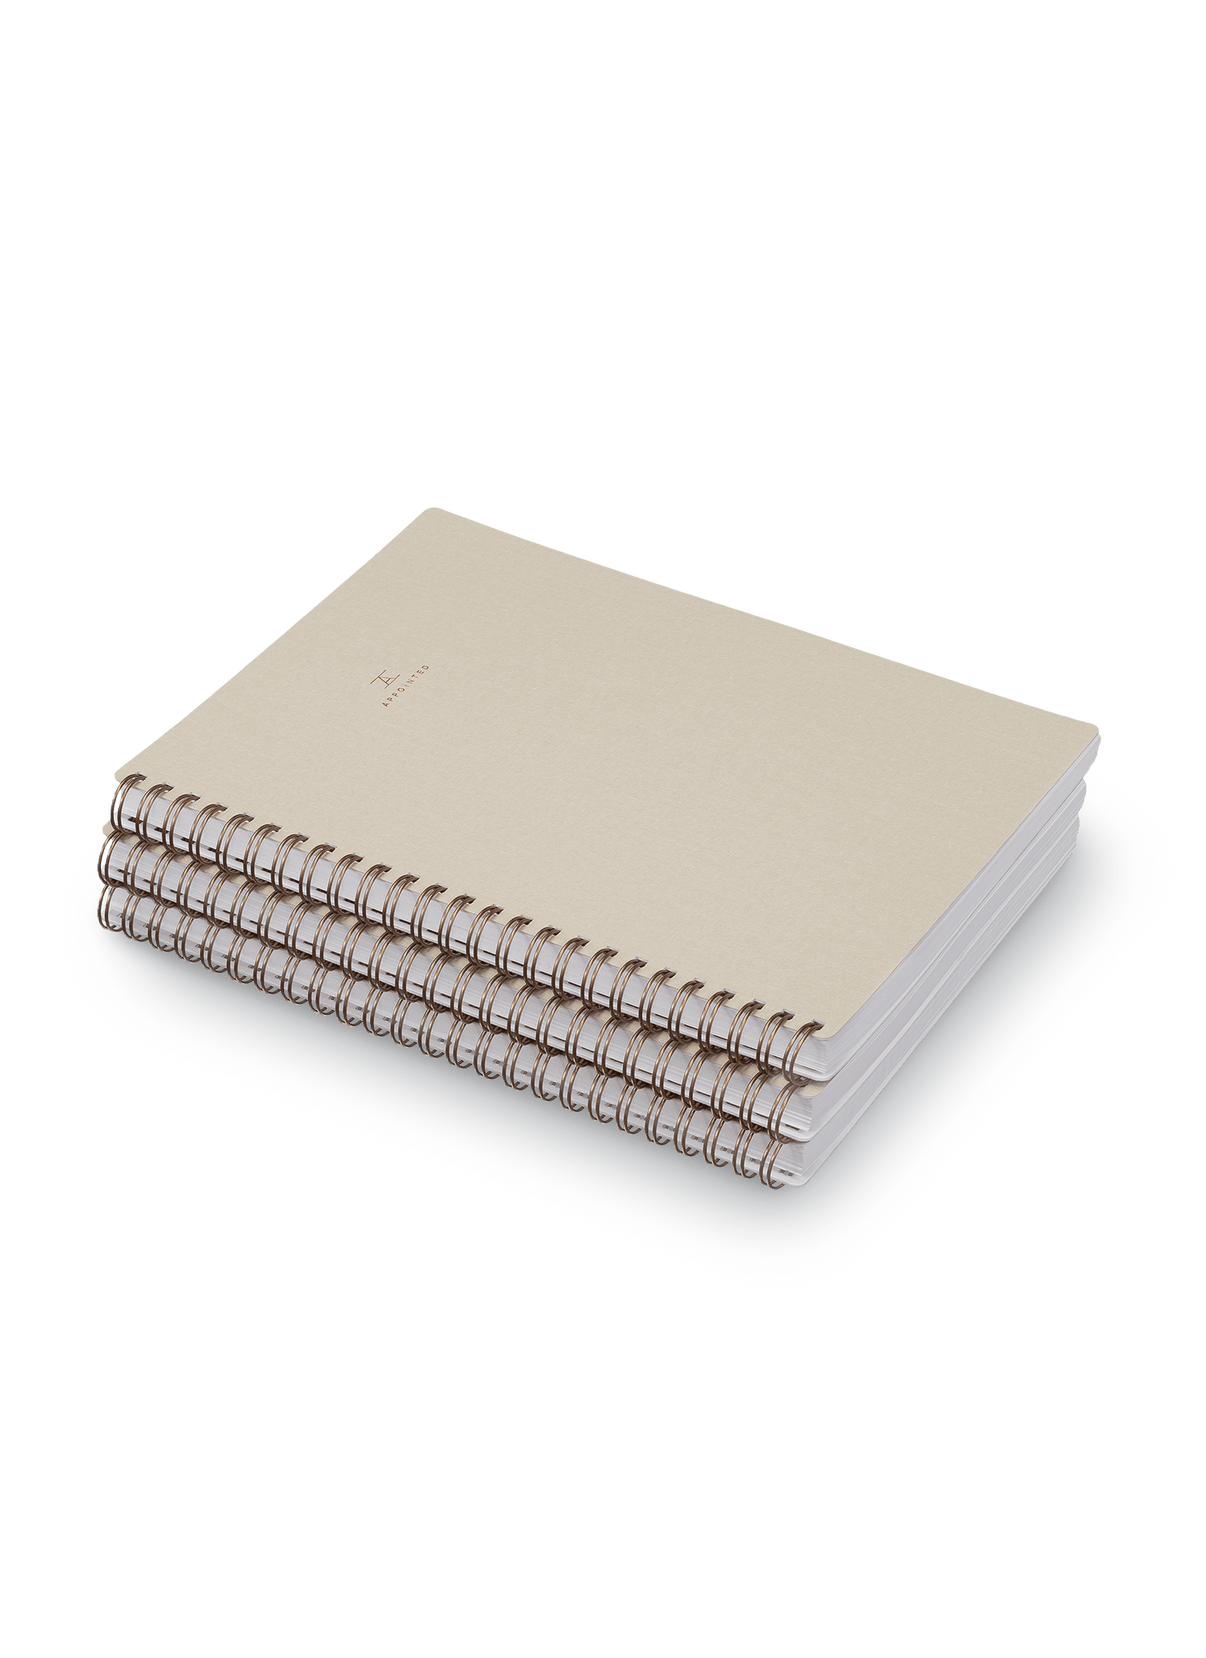 Appointed Workbook in Natural Linen bookcloth with brass wire-o binding stacked front angled view